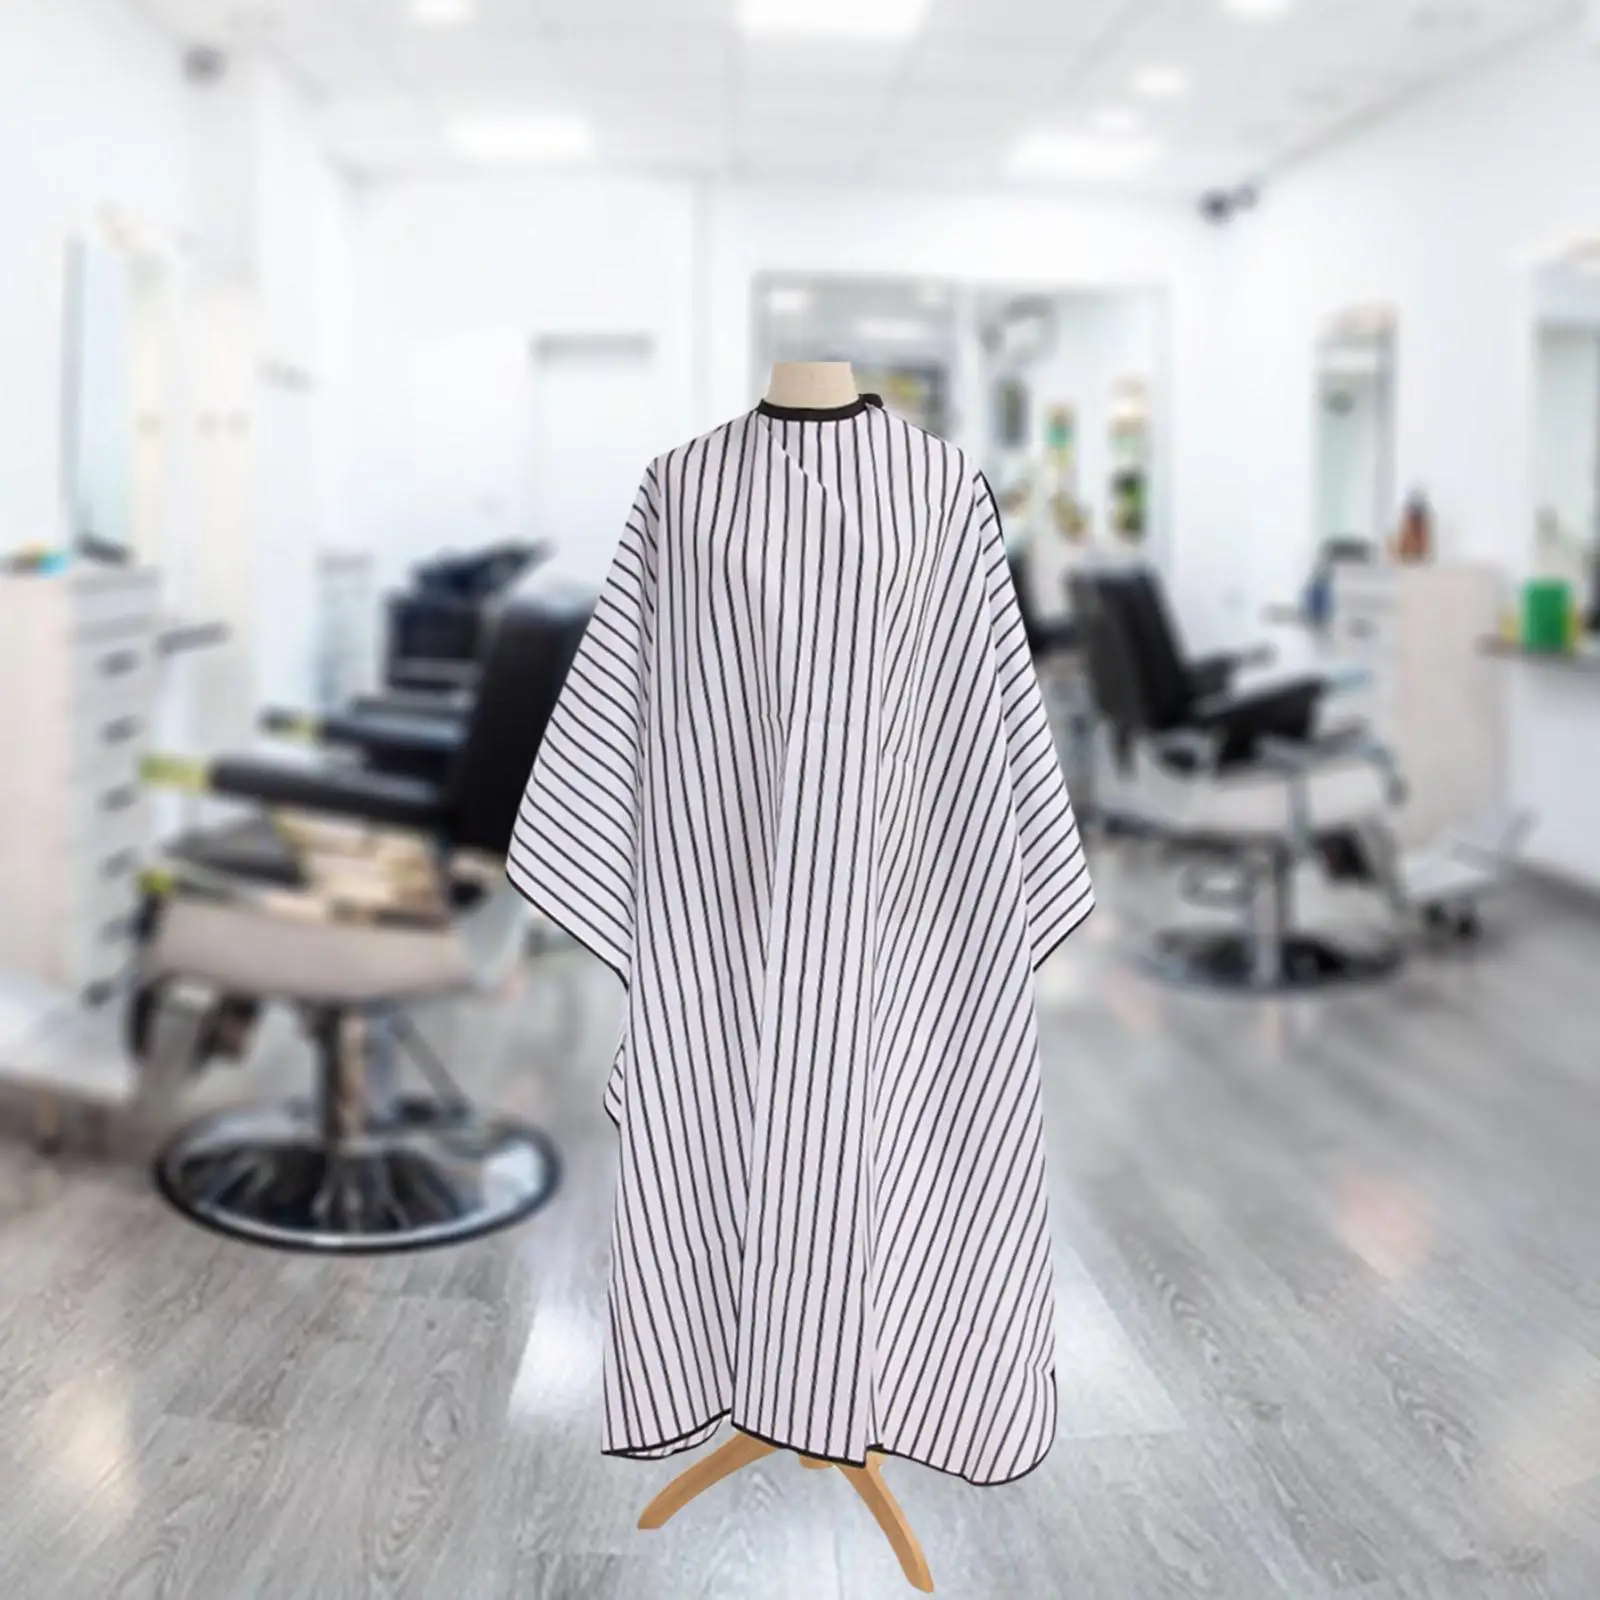 Stripe Pattern Hair Cutting Cape, Great Fabric Accessories for